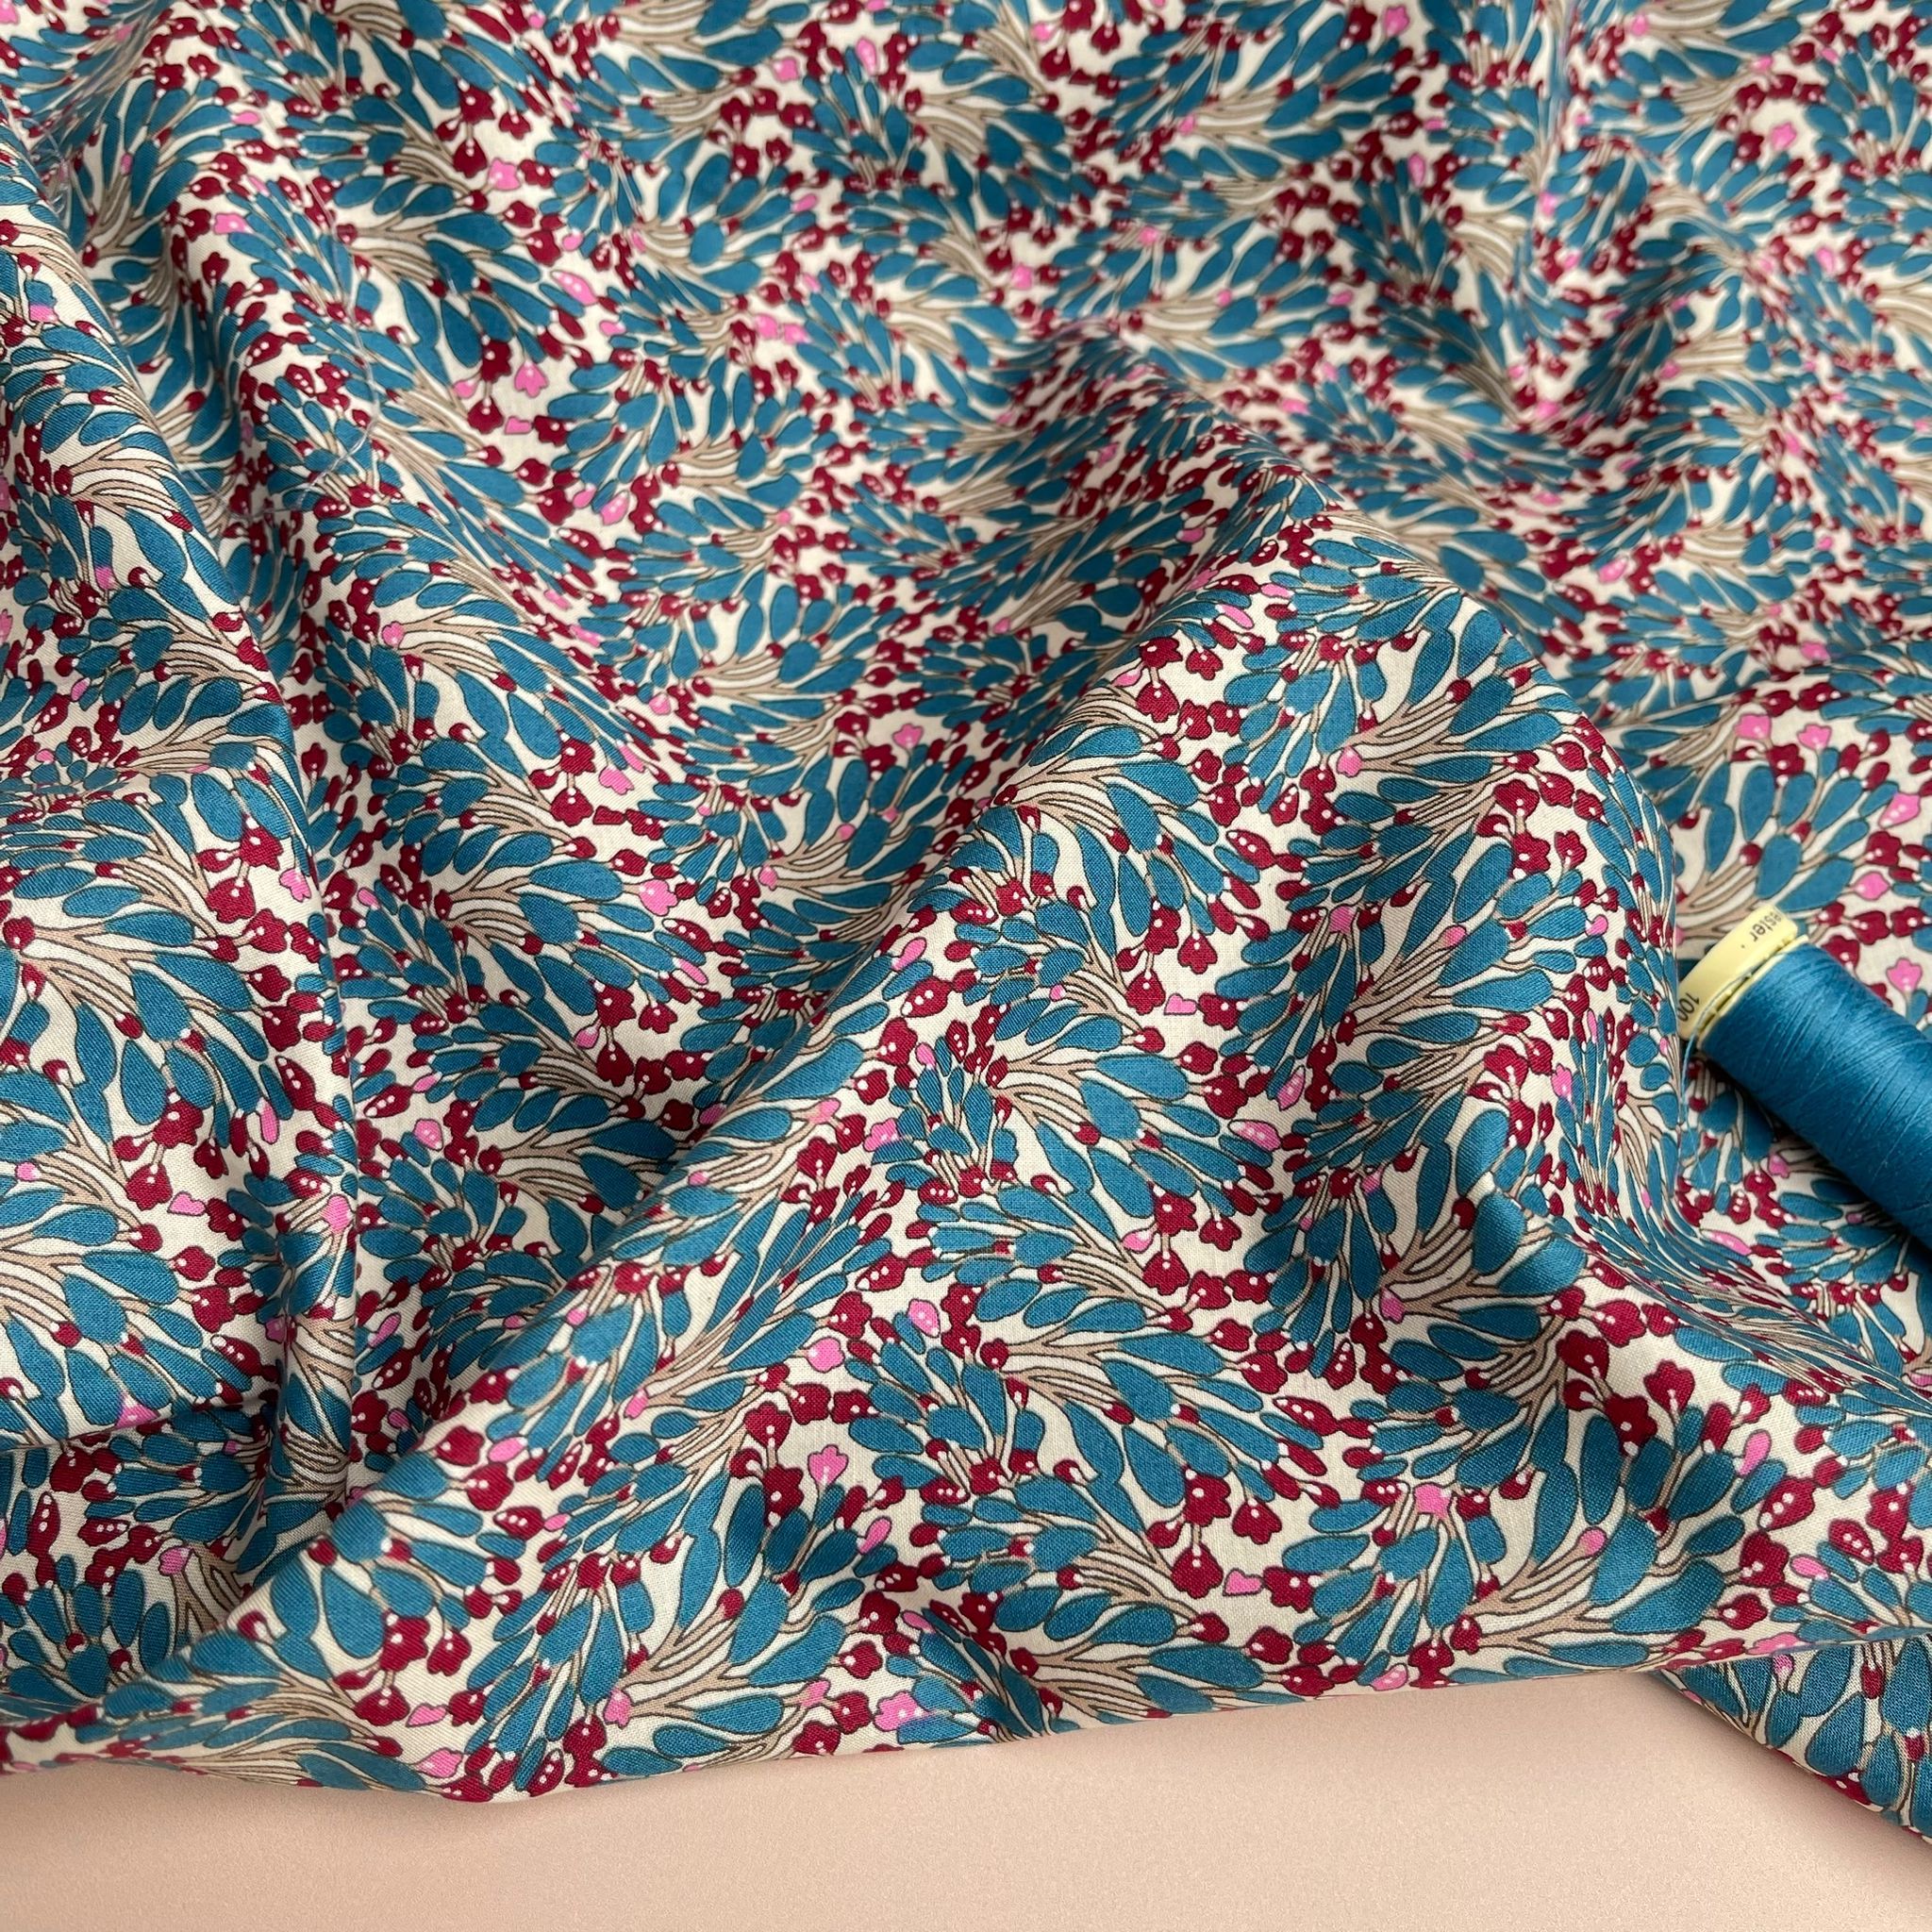 Graphic Seaweed Teal Cotton Lawn Fabric